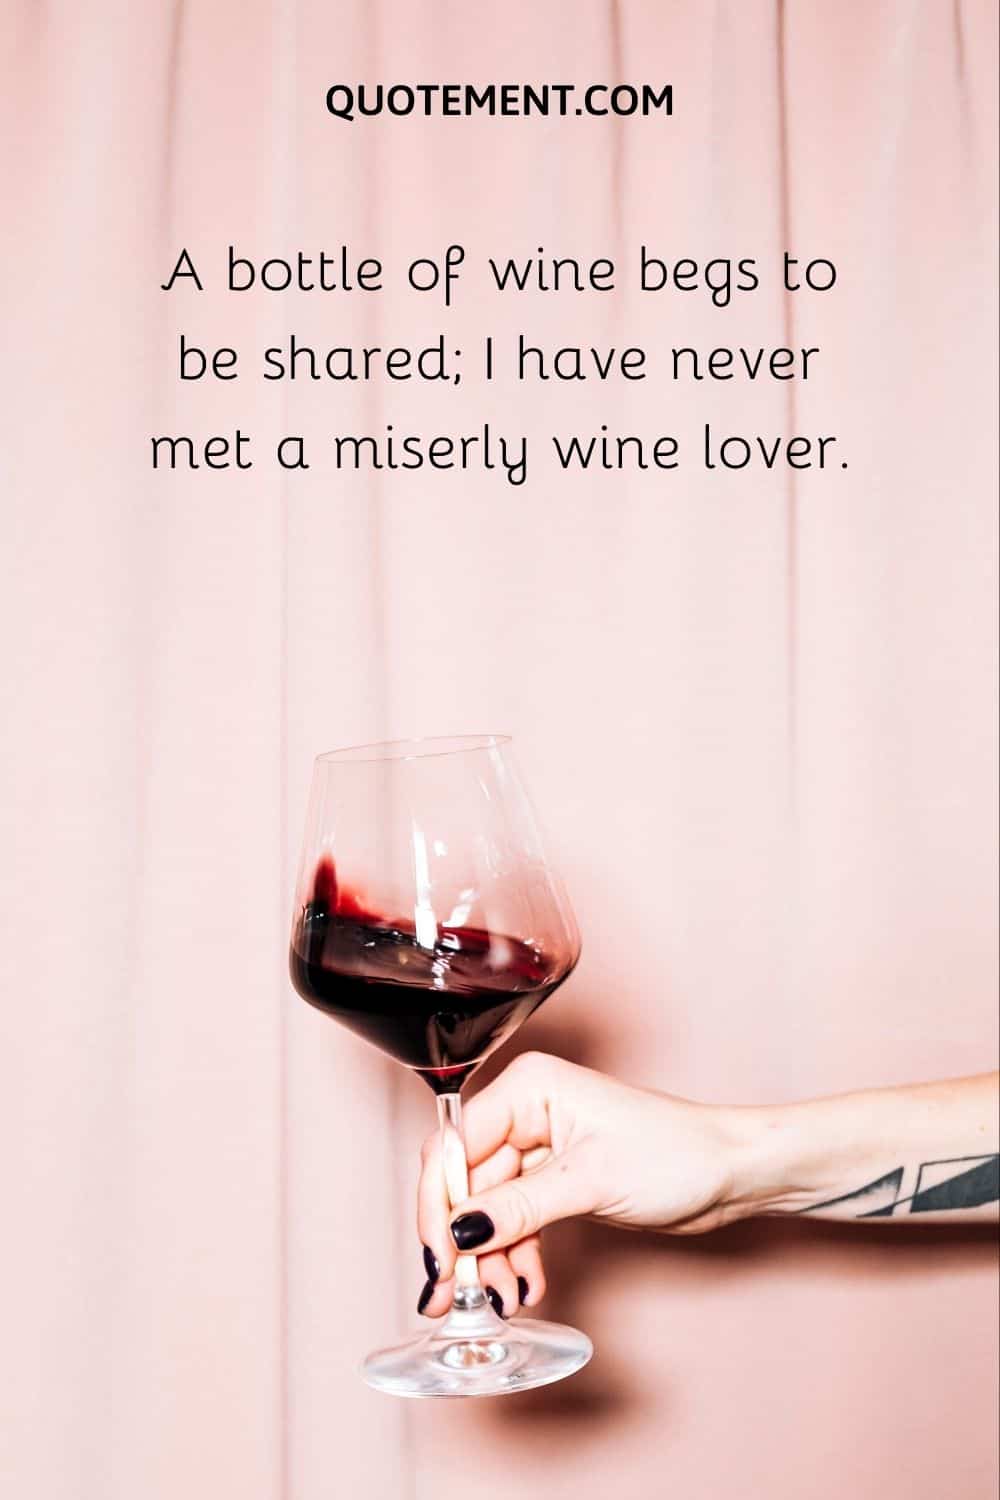 A bottle of wine begs to be shared